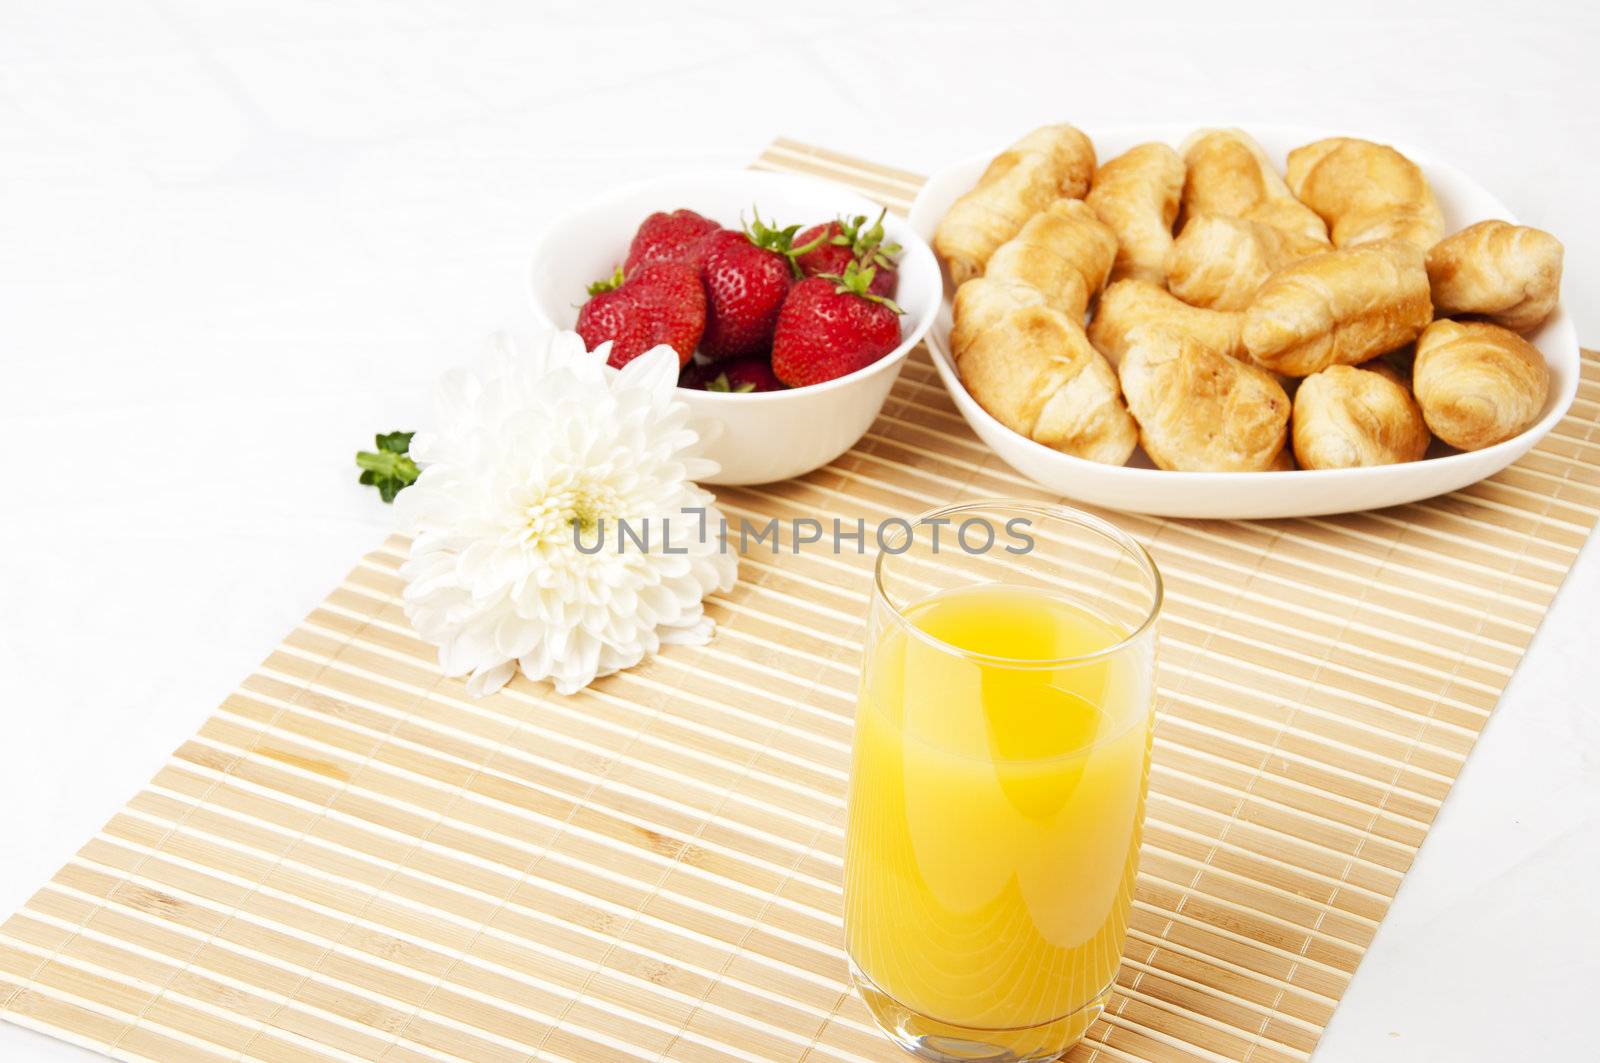 juice, croissants and Berries On a bamboo napkin by adam121